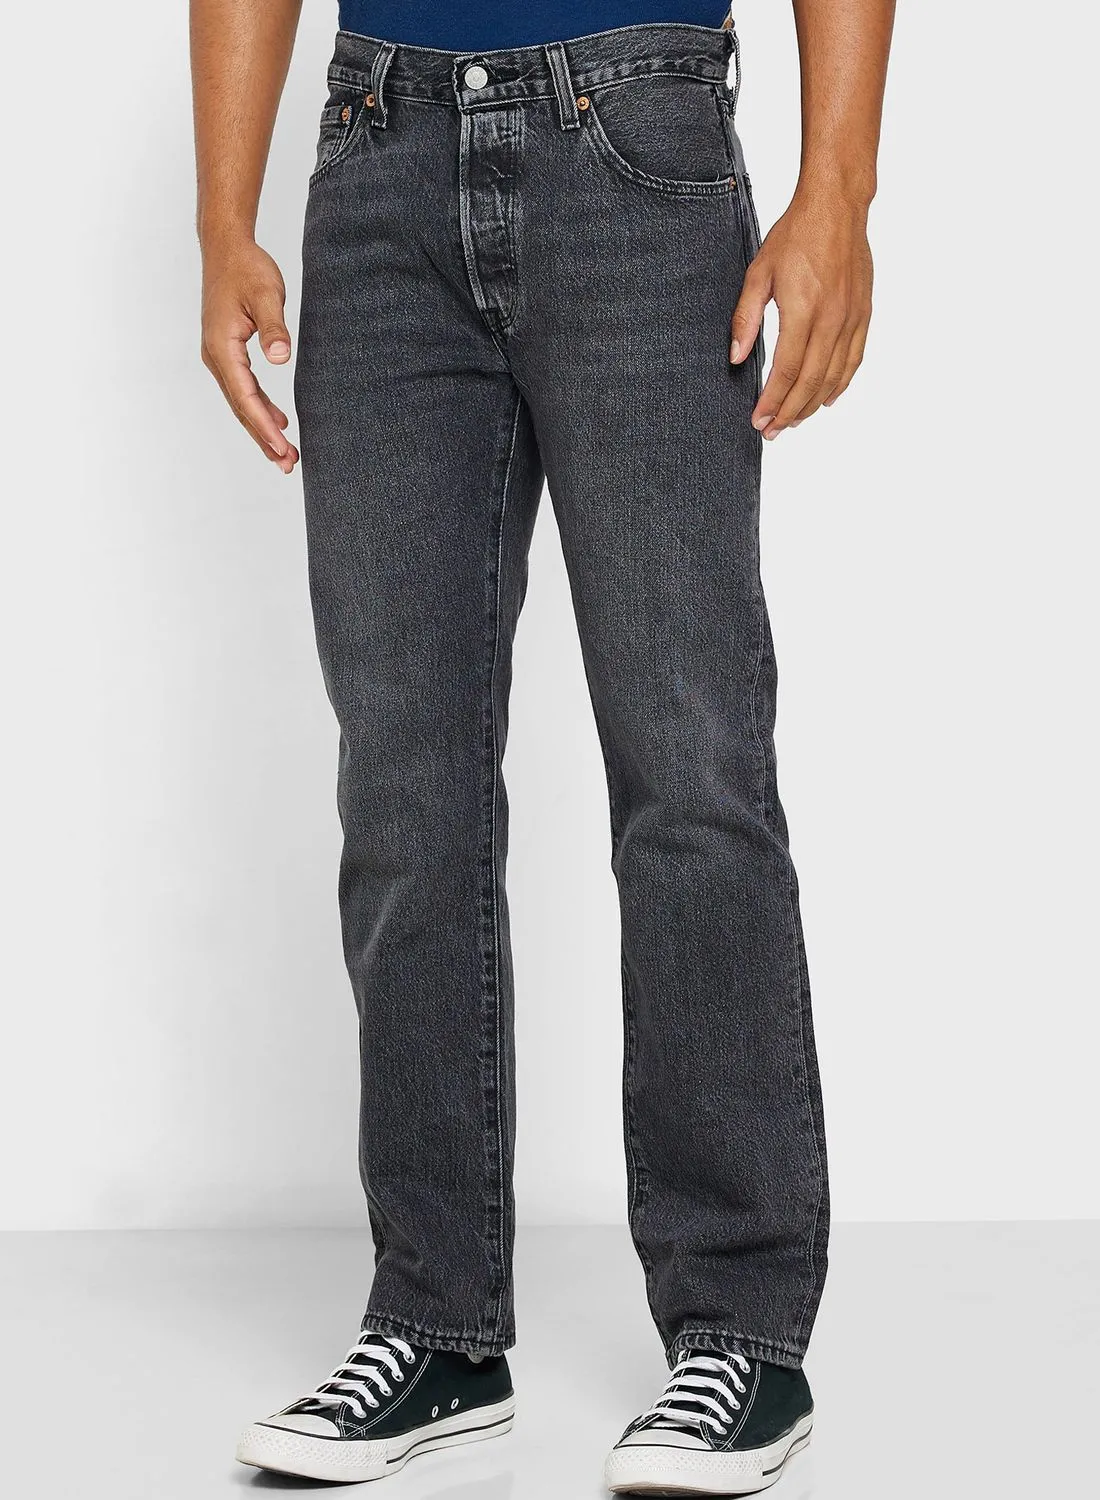 Levi's Straight Fit Light Wash Jeans